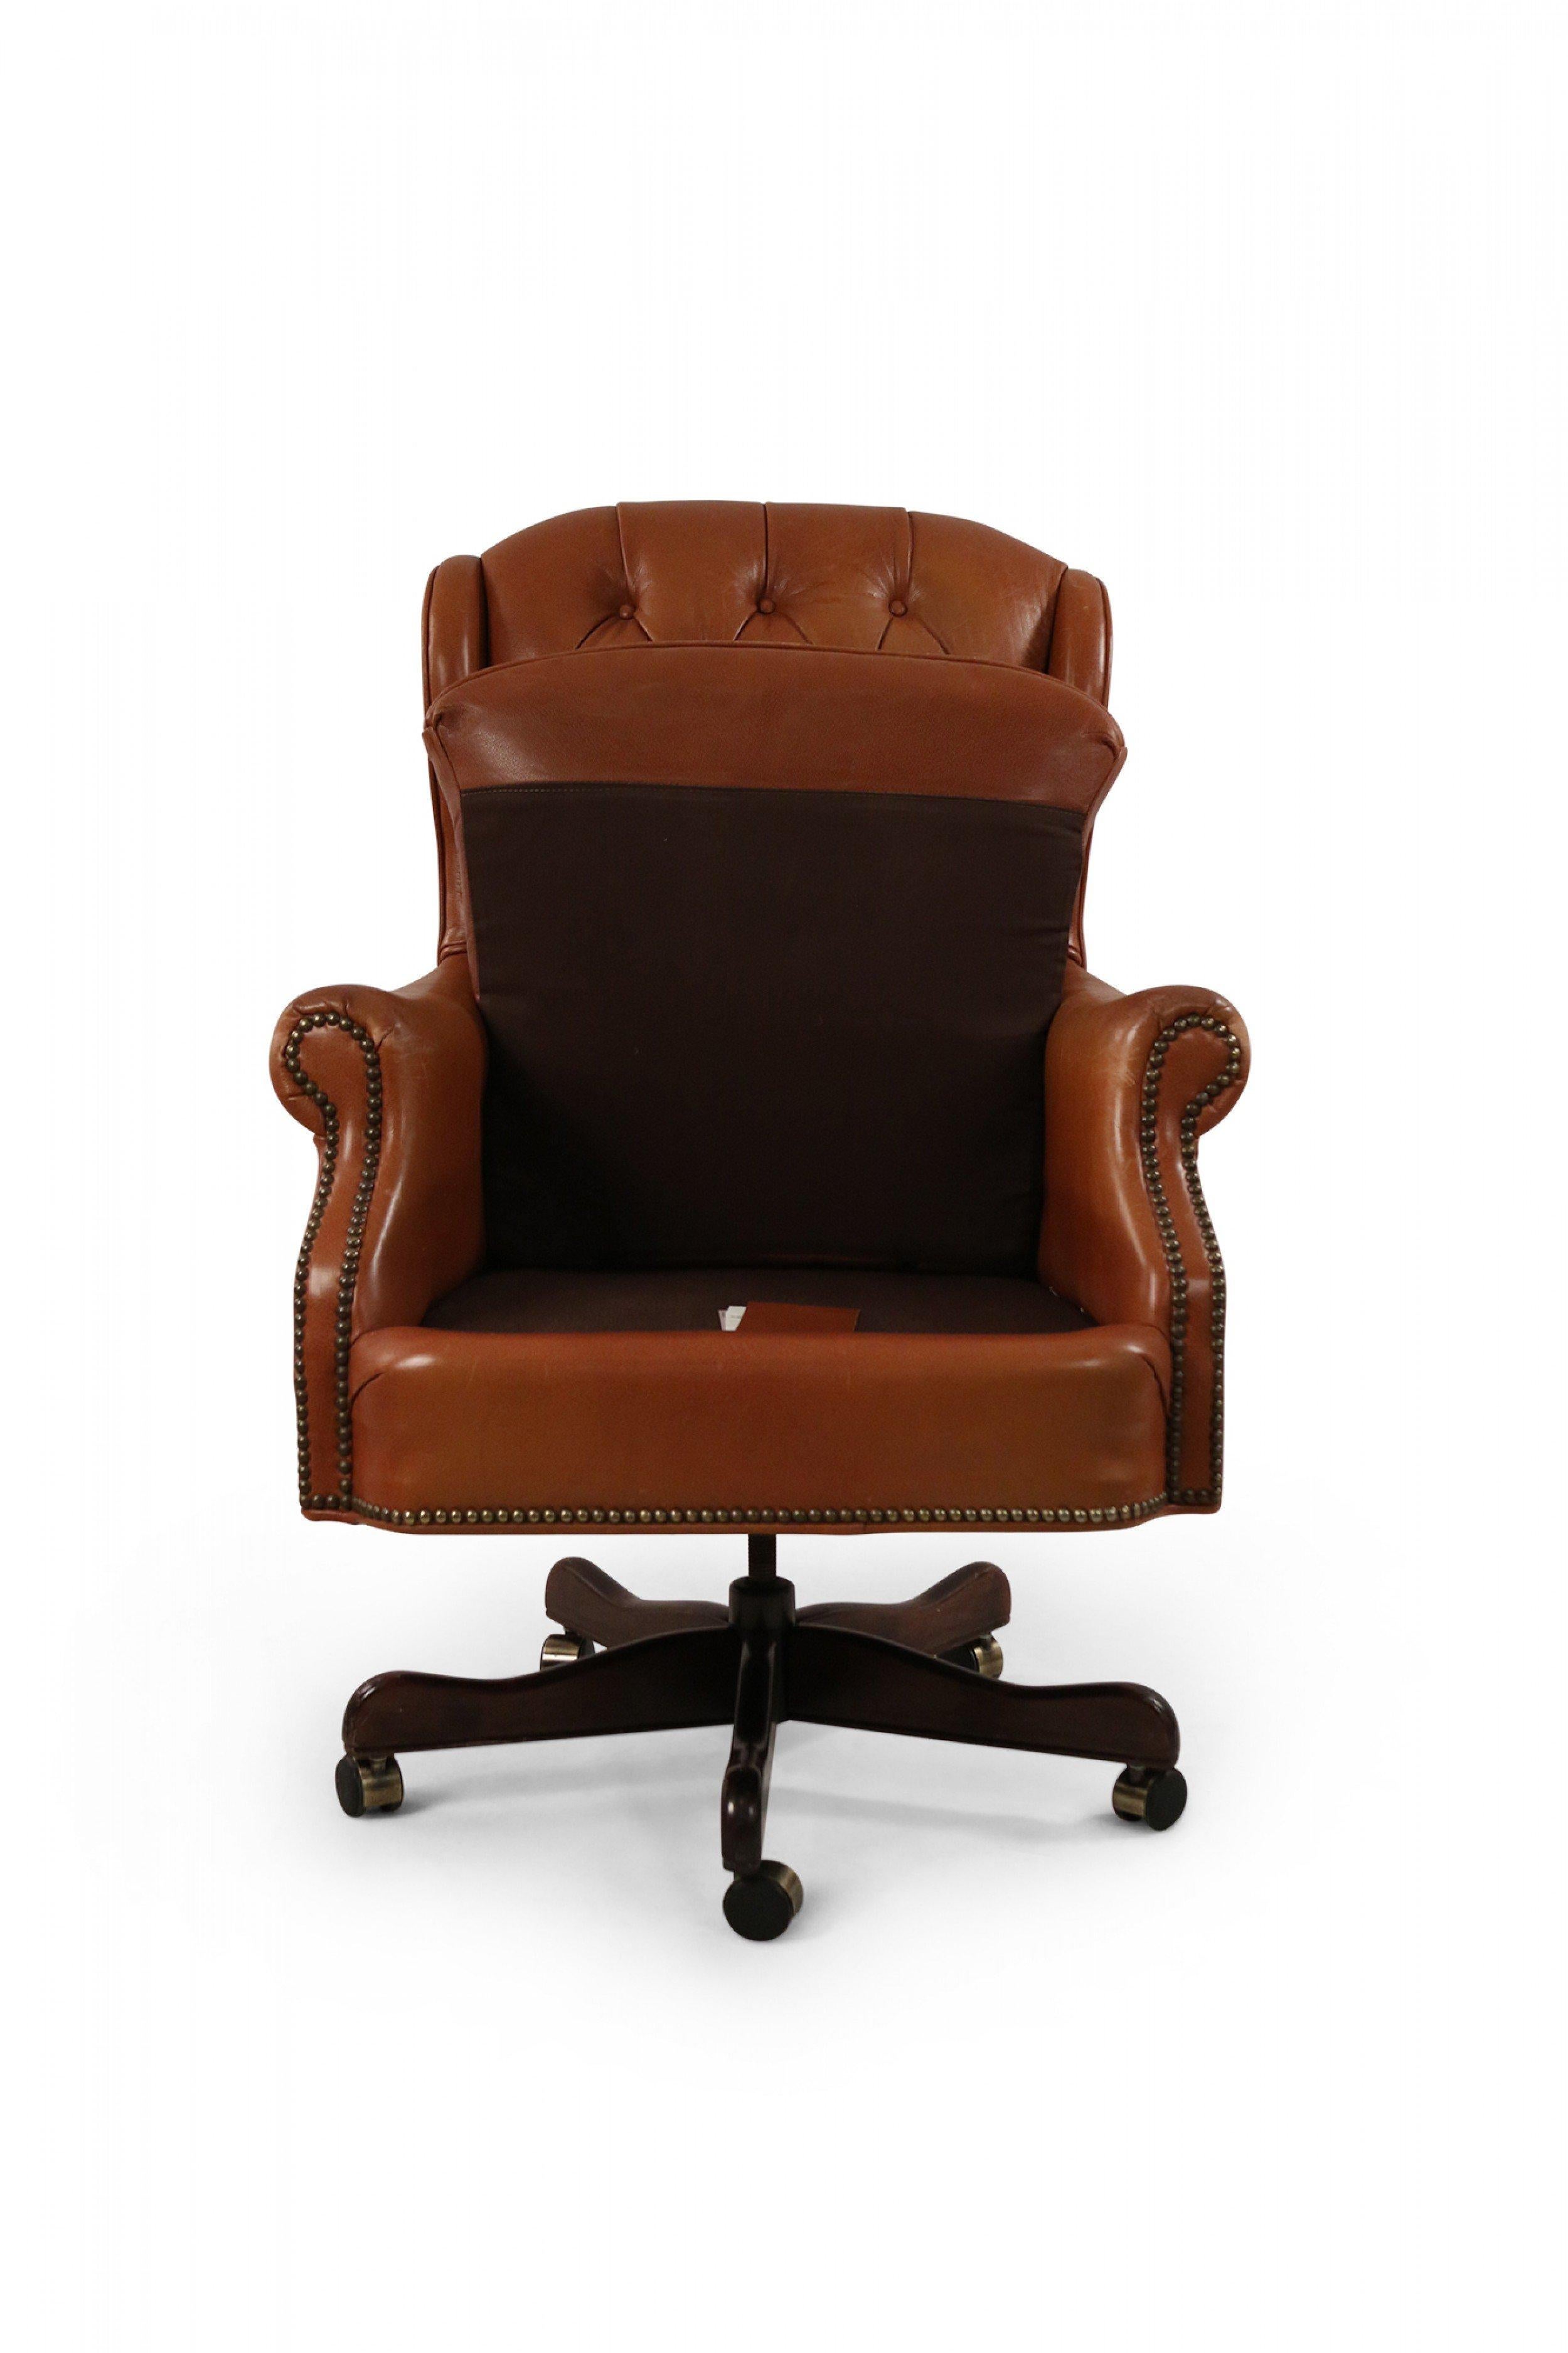 Mid-Century American Brown Tufted Leather Swivel Office / Armchair For Sale 11